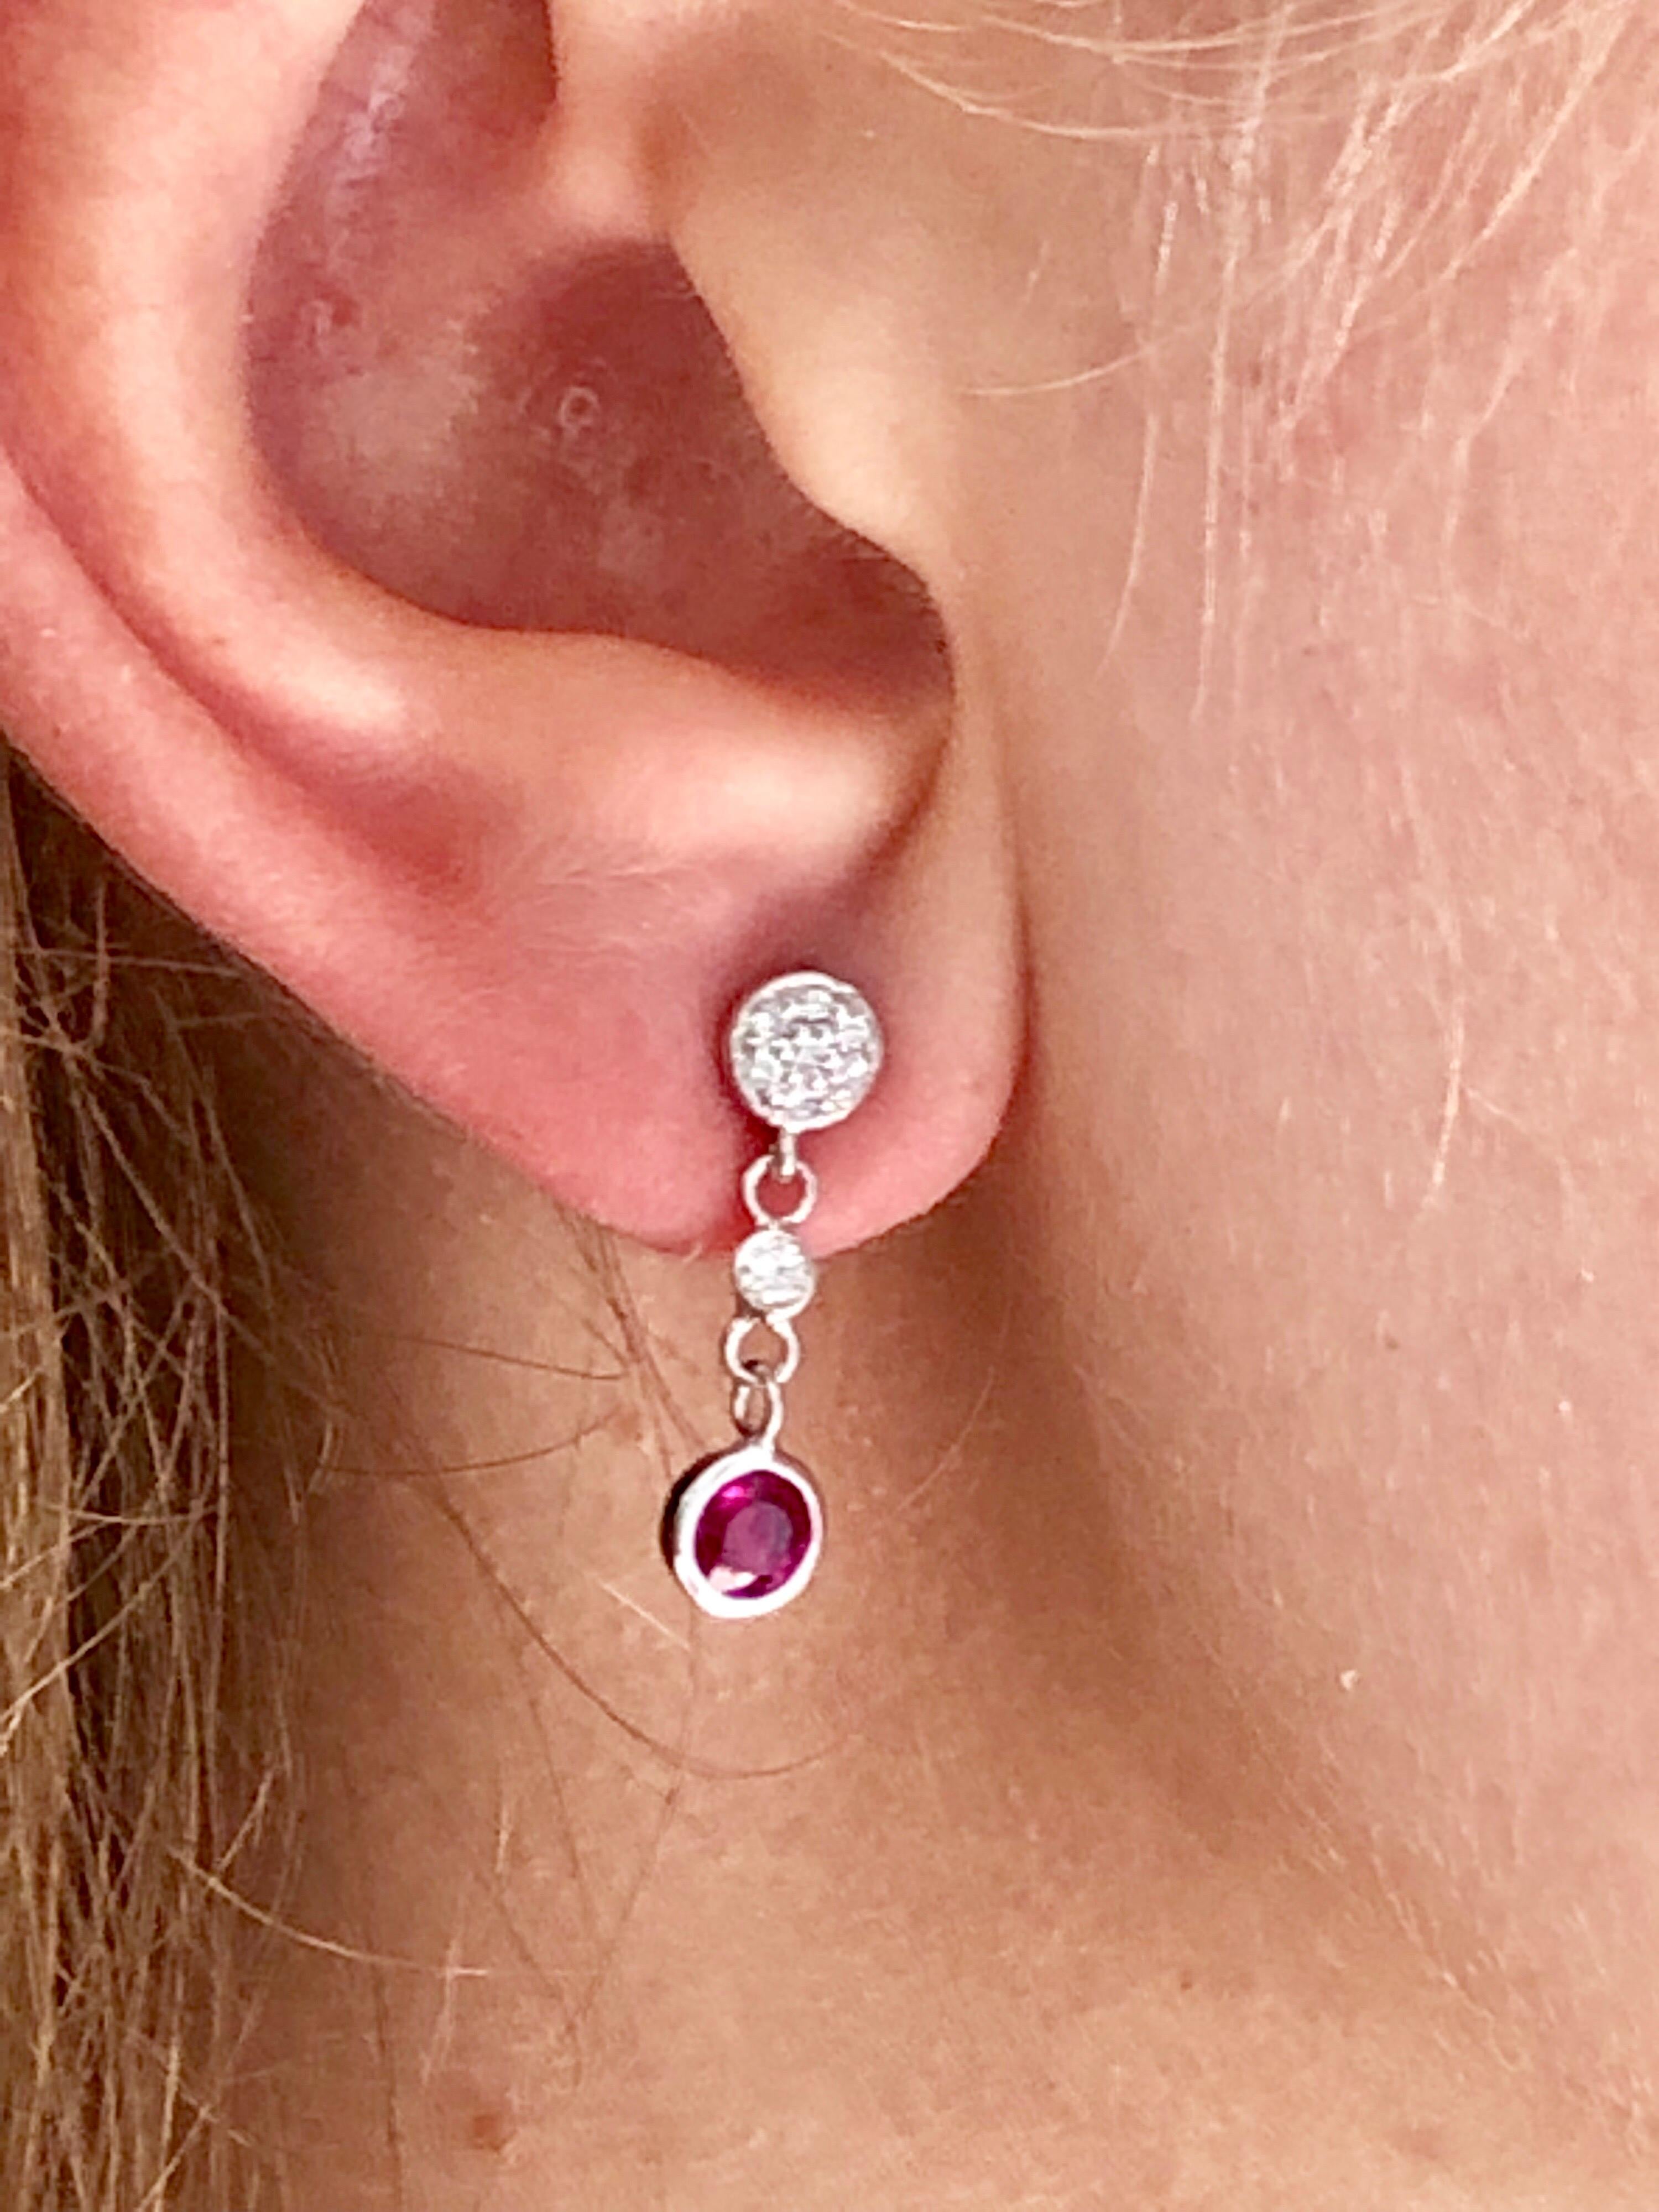 Round Cut Diamond and Round Ruby Drop Earrings Weighing 1.38 Carat